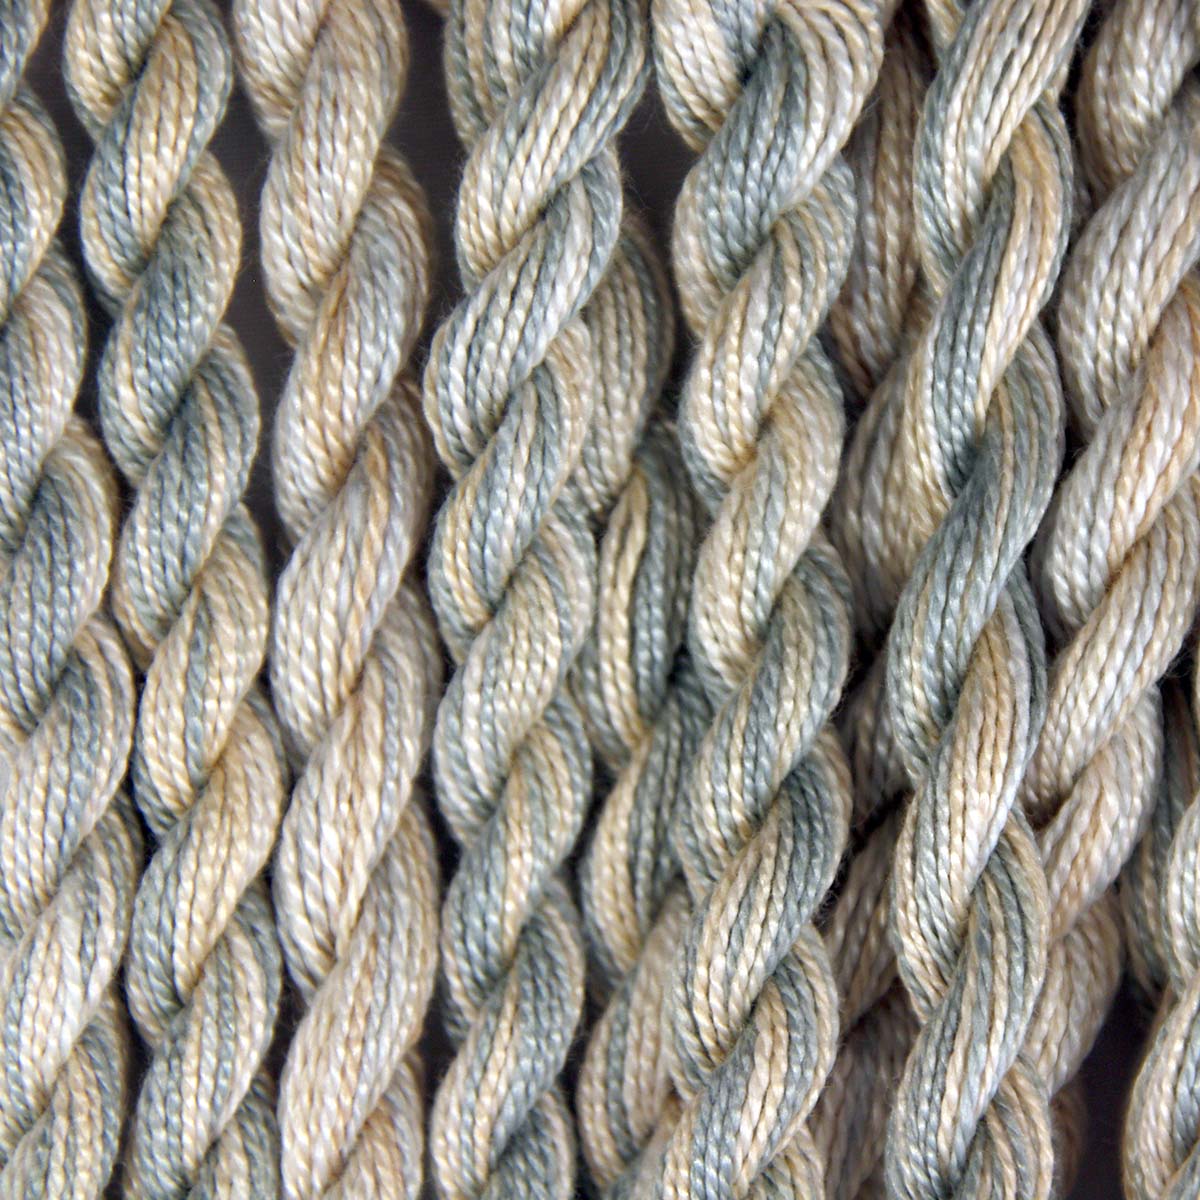 www.colourstreams.com.au Colour Streams Hand Dyed Swww.colourstreams.com.au Colour Streams Hand Dyed Cotton Threads Cotto Strands Slow Stitch Embroidery Textile Arts Fibre DL 52 Cotswold Stone Neutrals Greys Creams Browns